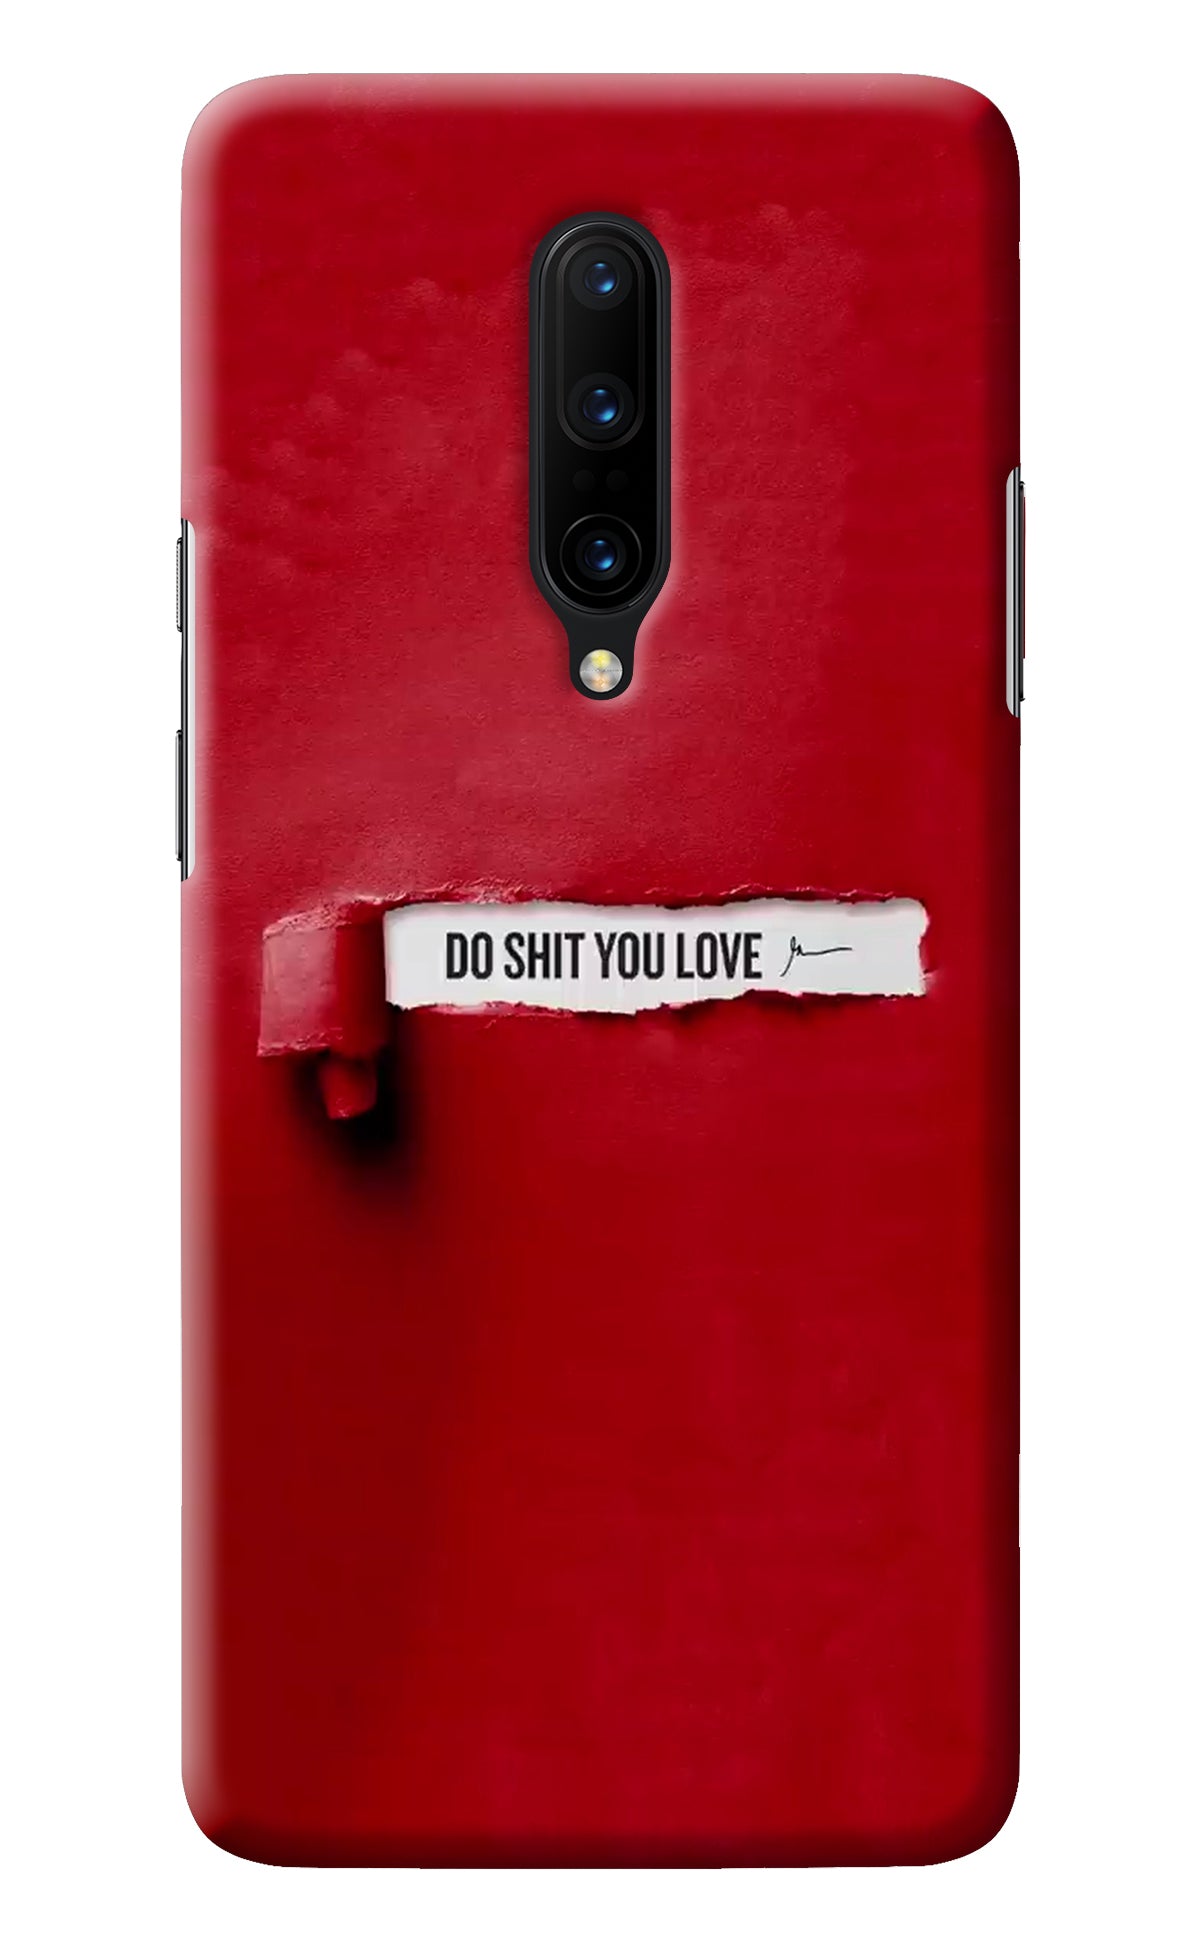 Do Shit You Love Oneplus 7 Pro Back Cover